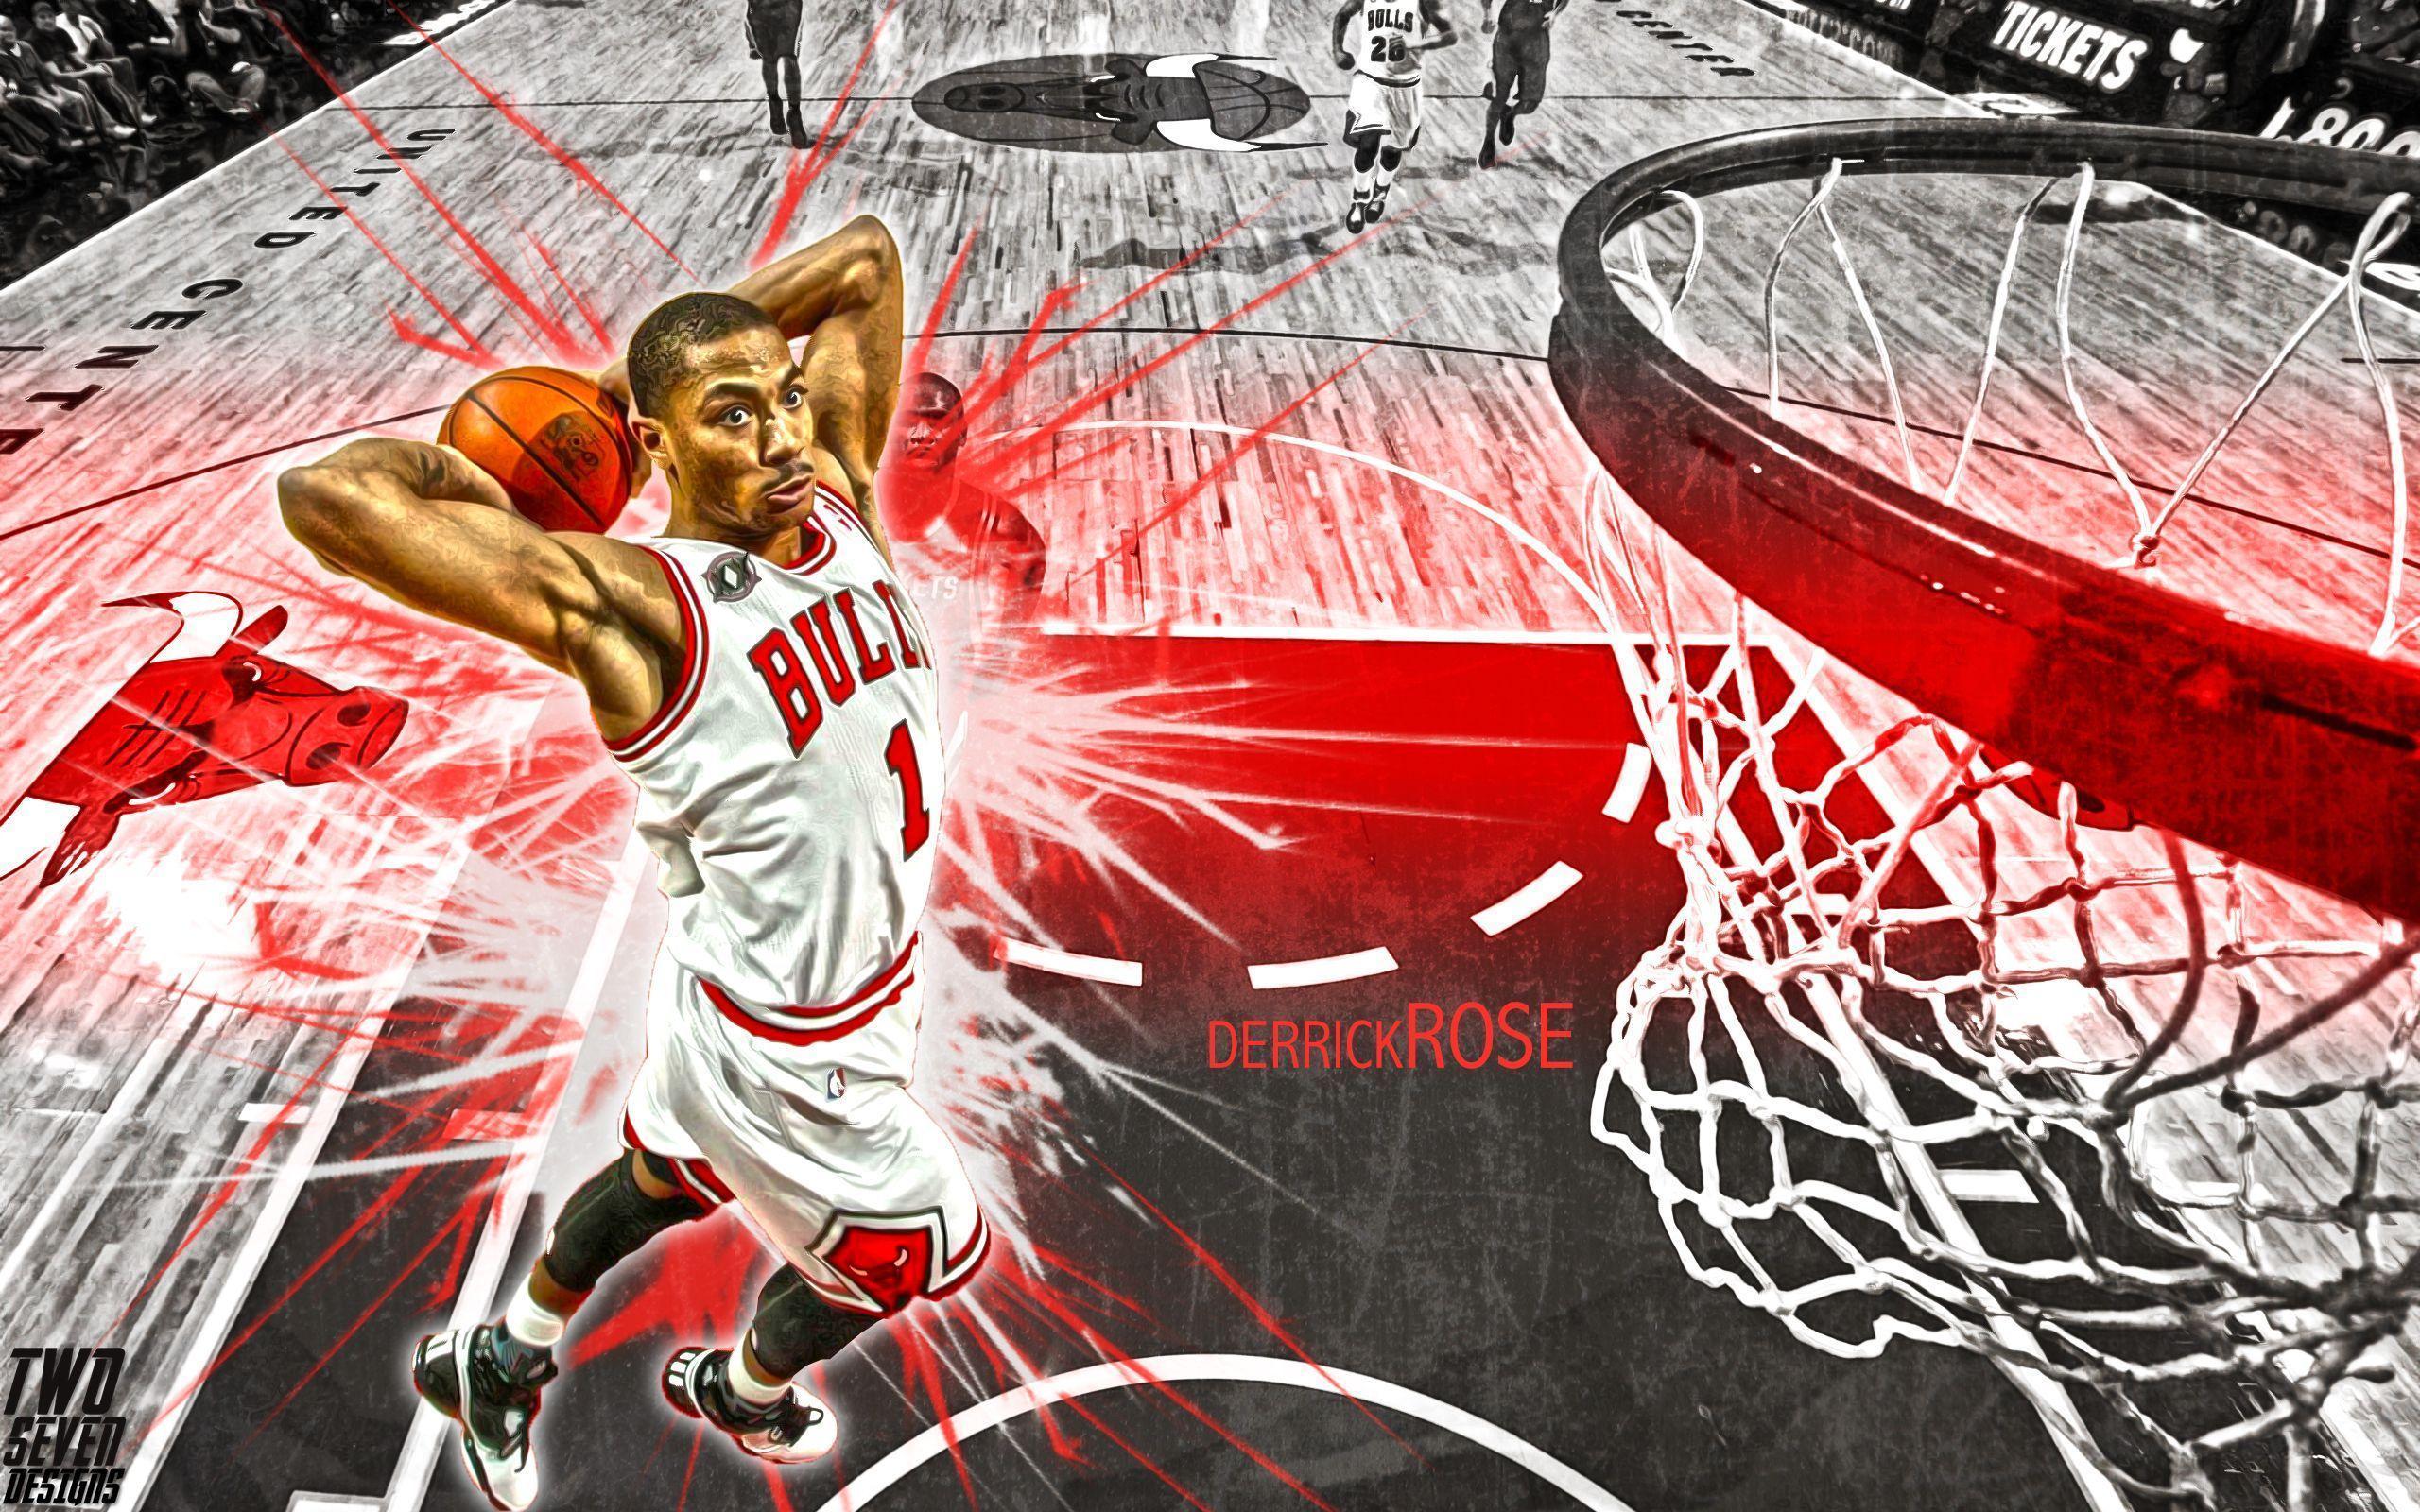 Derrick Rose Wallpaper High Resolution and Quality Download